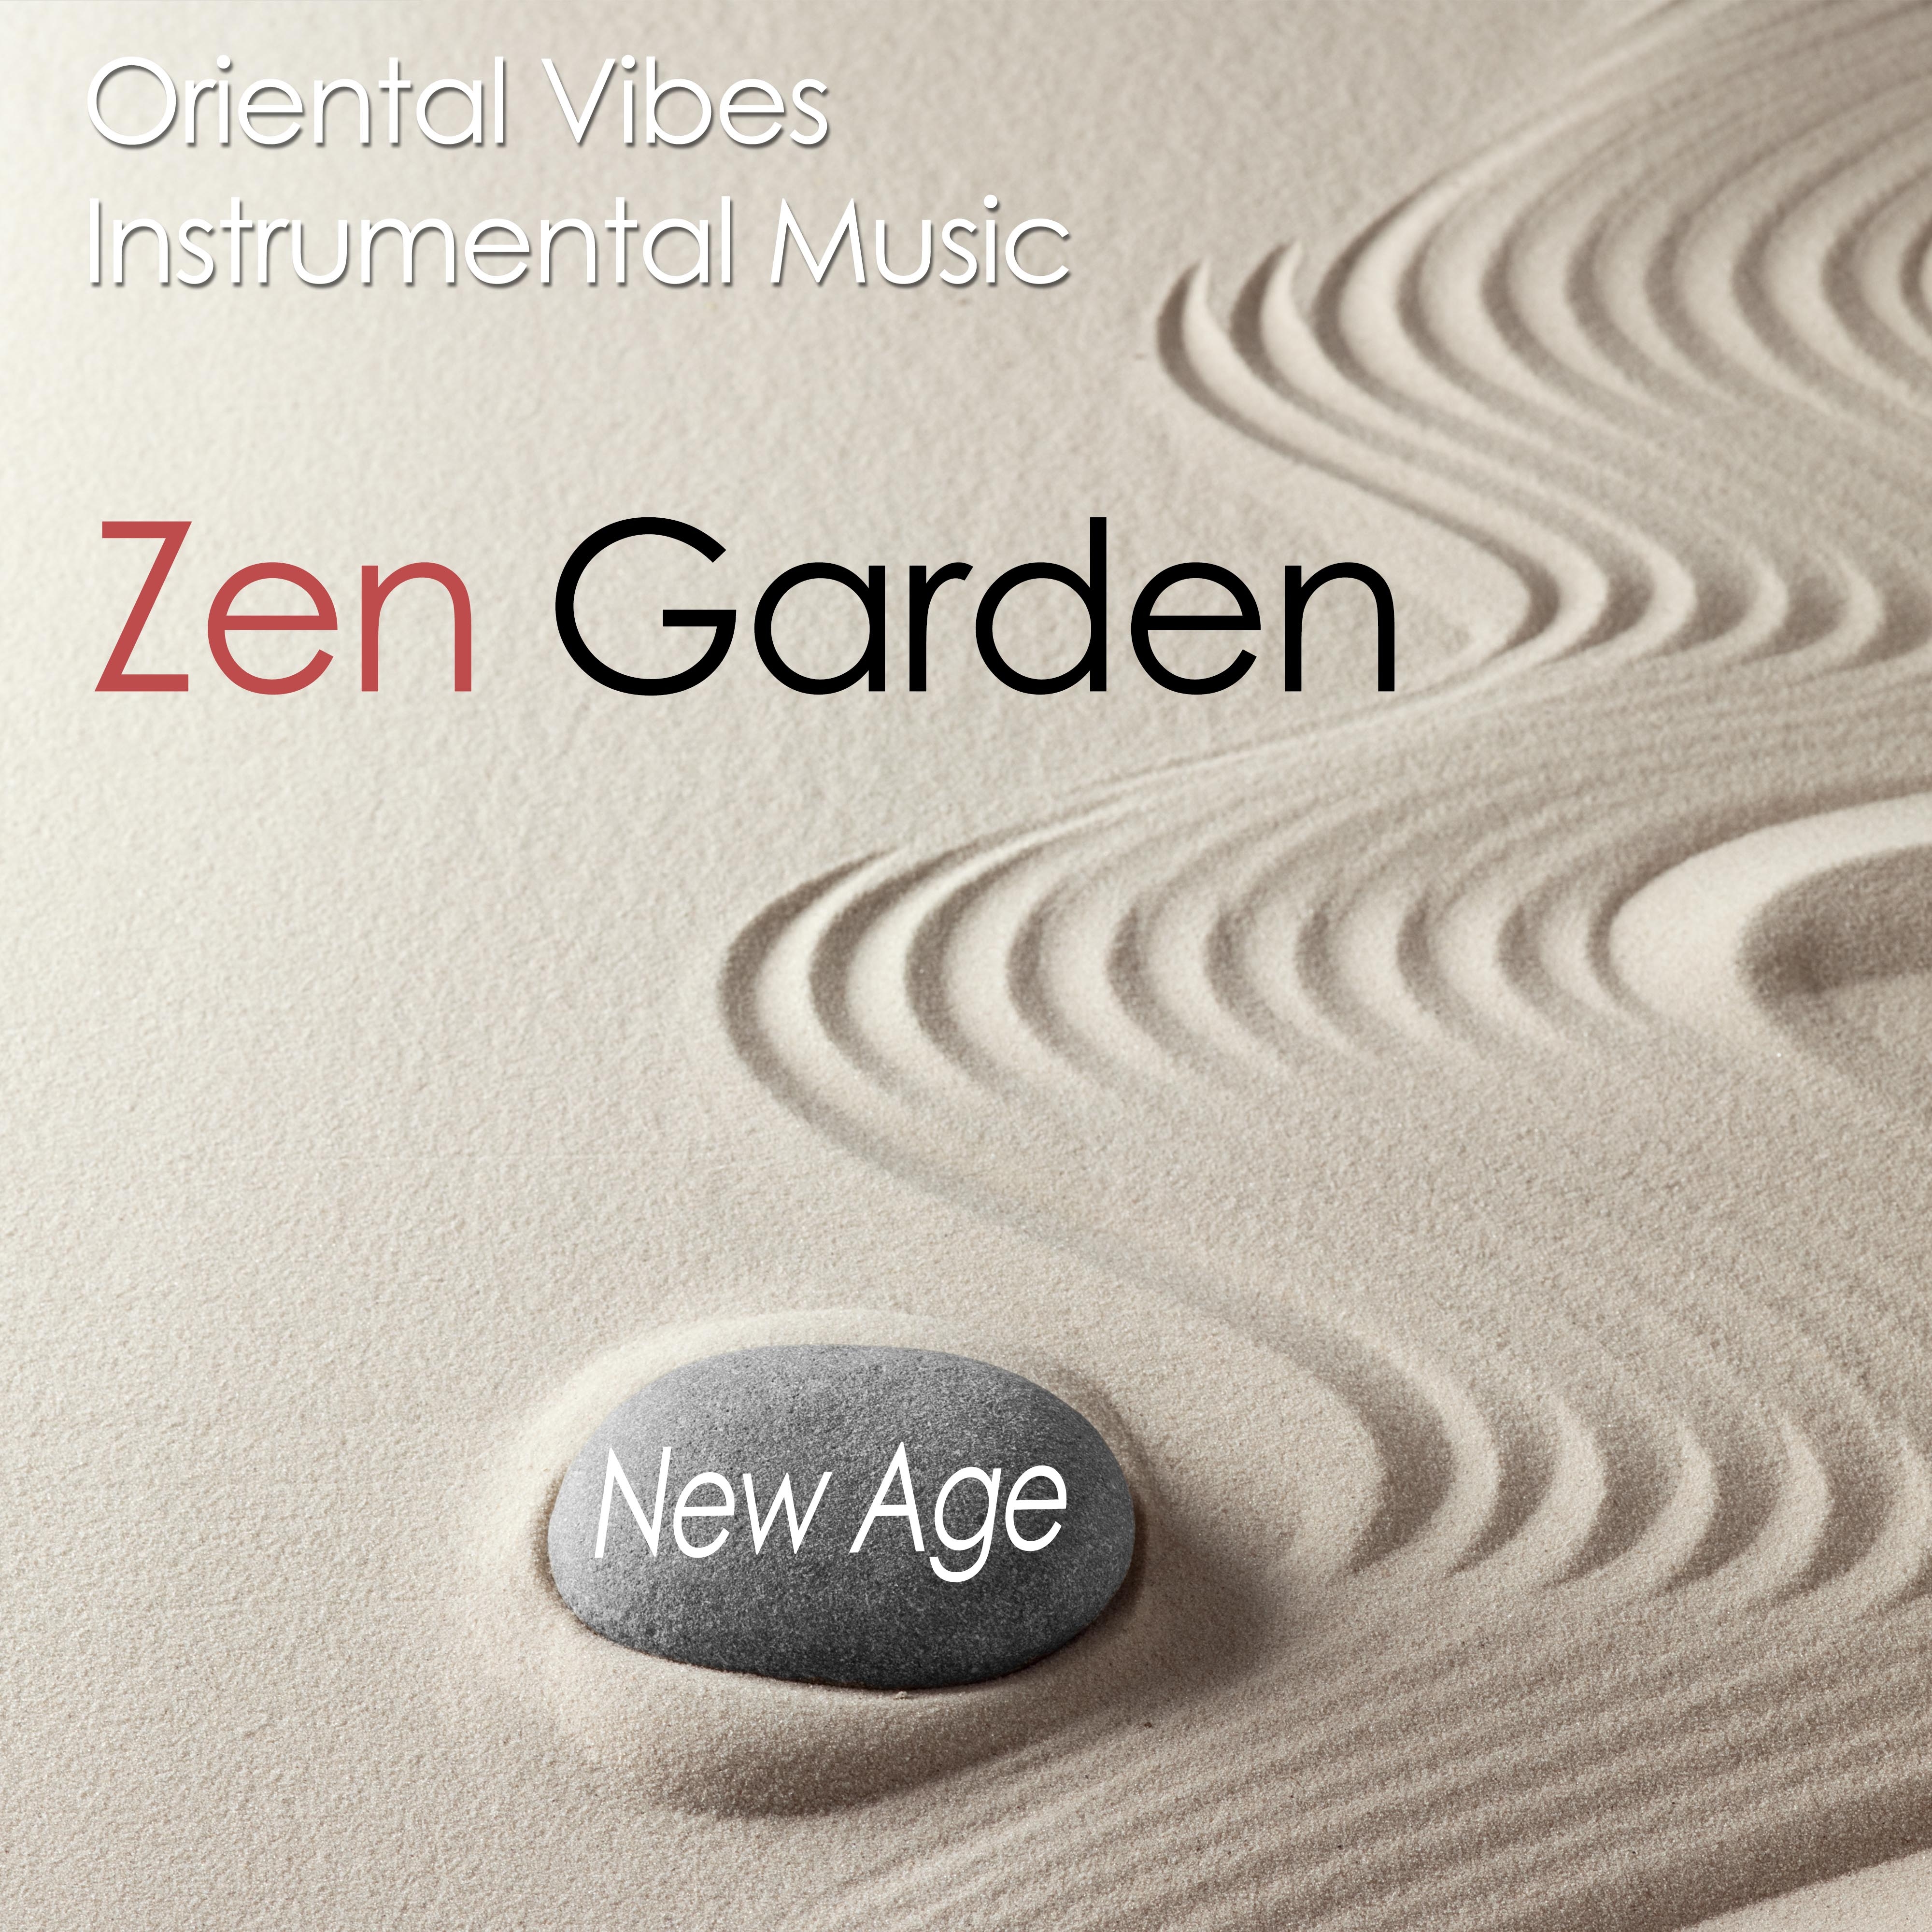 Zen Garden: Oriental Vibes with Instrumental Music for Relaxation to Fend off Stress, Anxiety and Anger from your Daily Life